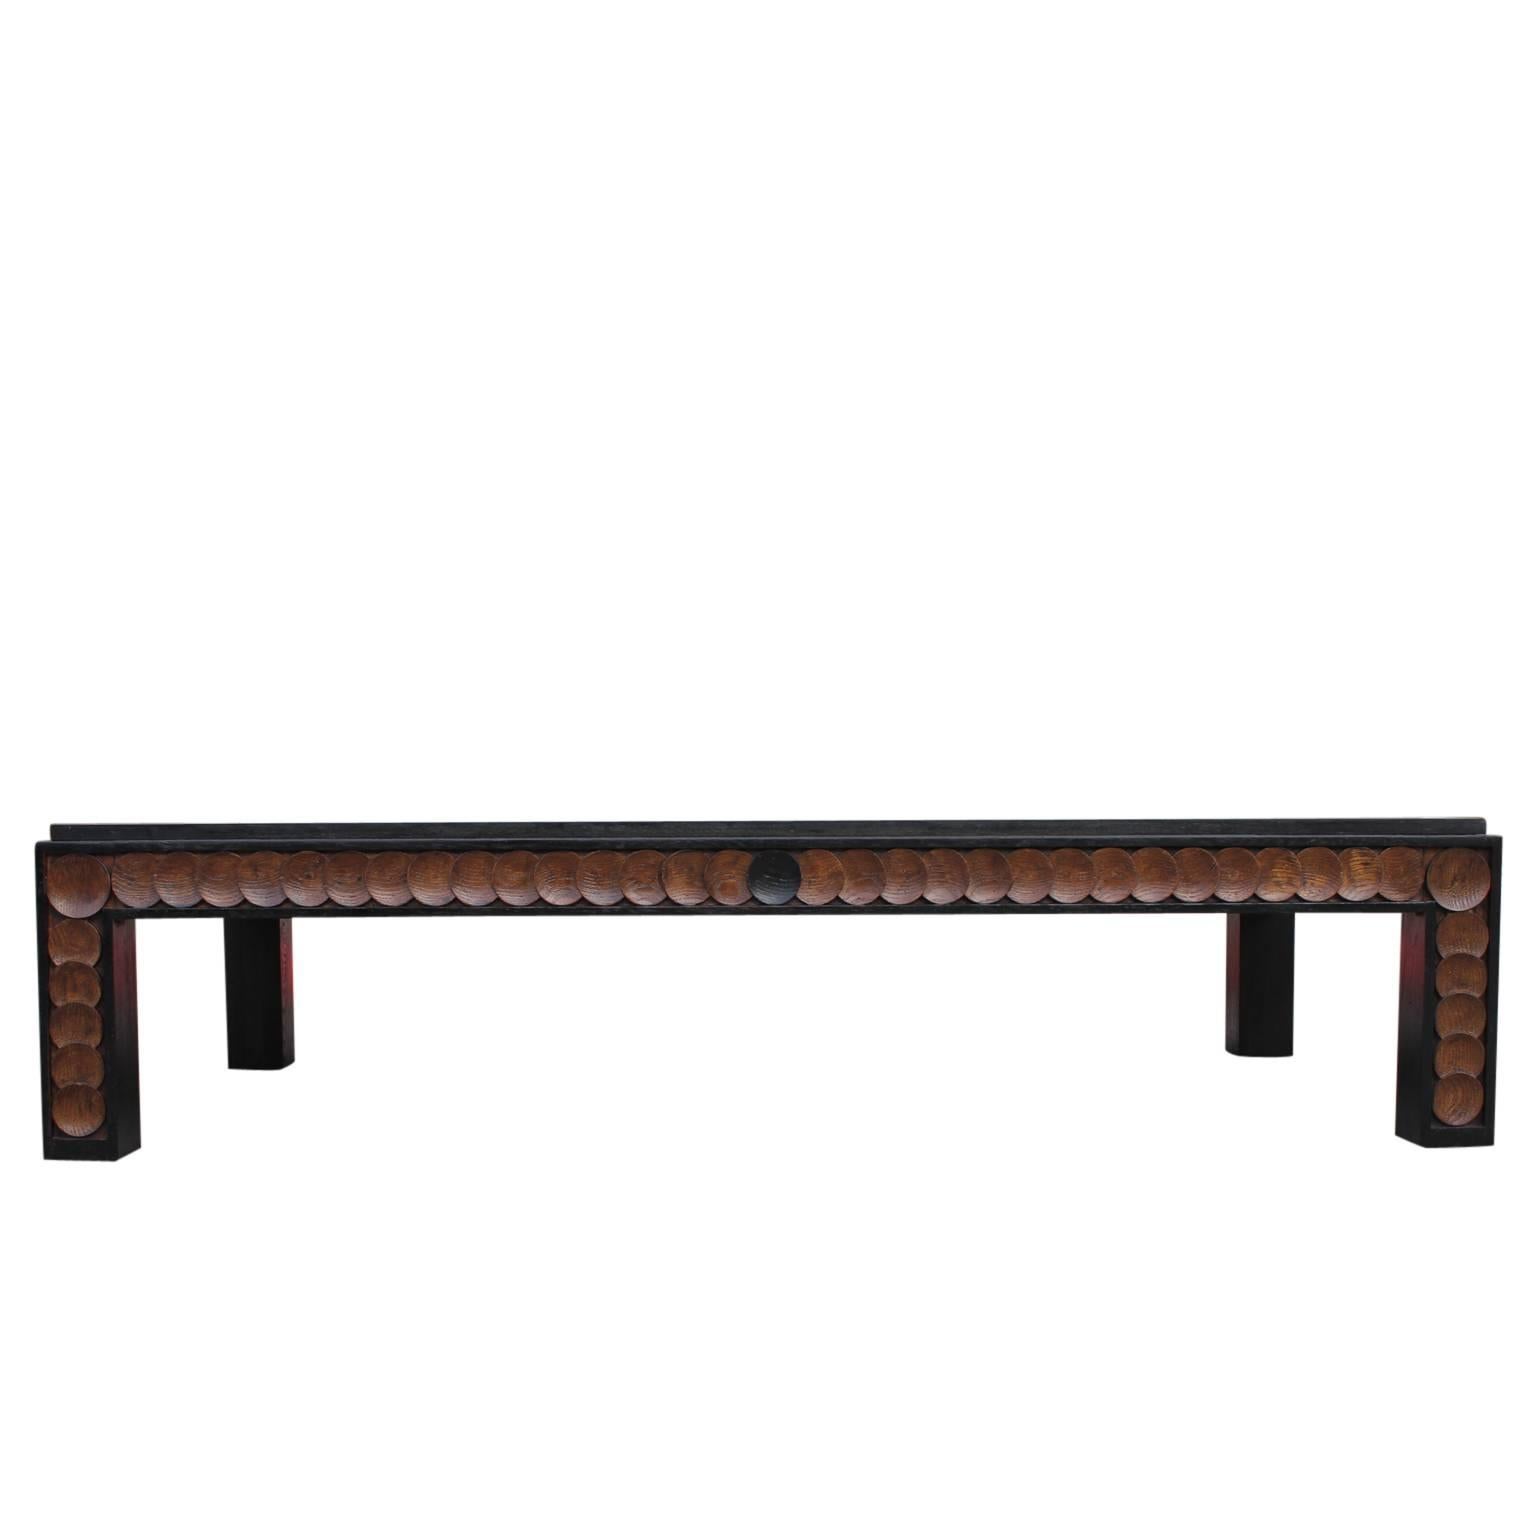 Large unique rectangle walnut Henredon coffee table. The table feature wonderful circle detailing all around the edges. The trim is in an ebony stain. The top has wonderful inlaid parquetry. In great vintage condition. 